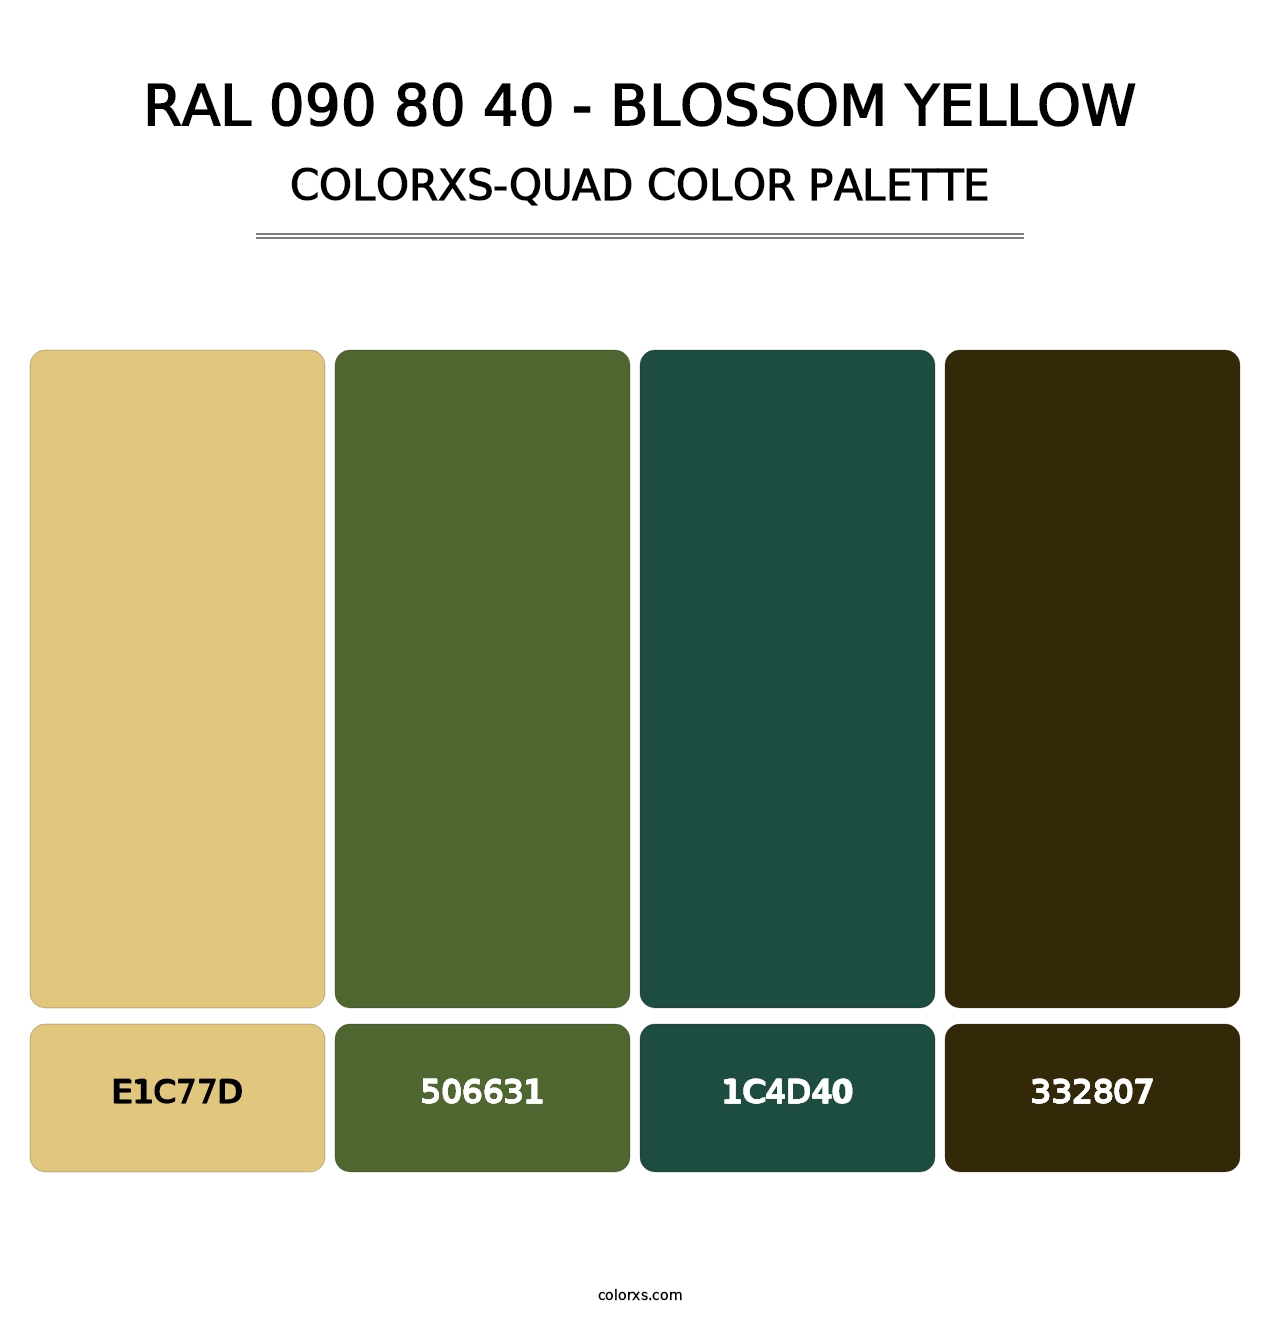 RAL 090 80 40 - Blossom Yellow - Colorxs Quad Palette